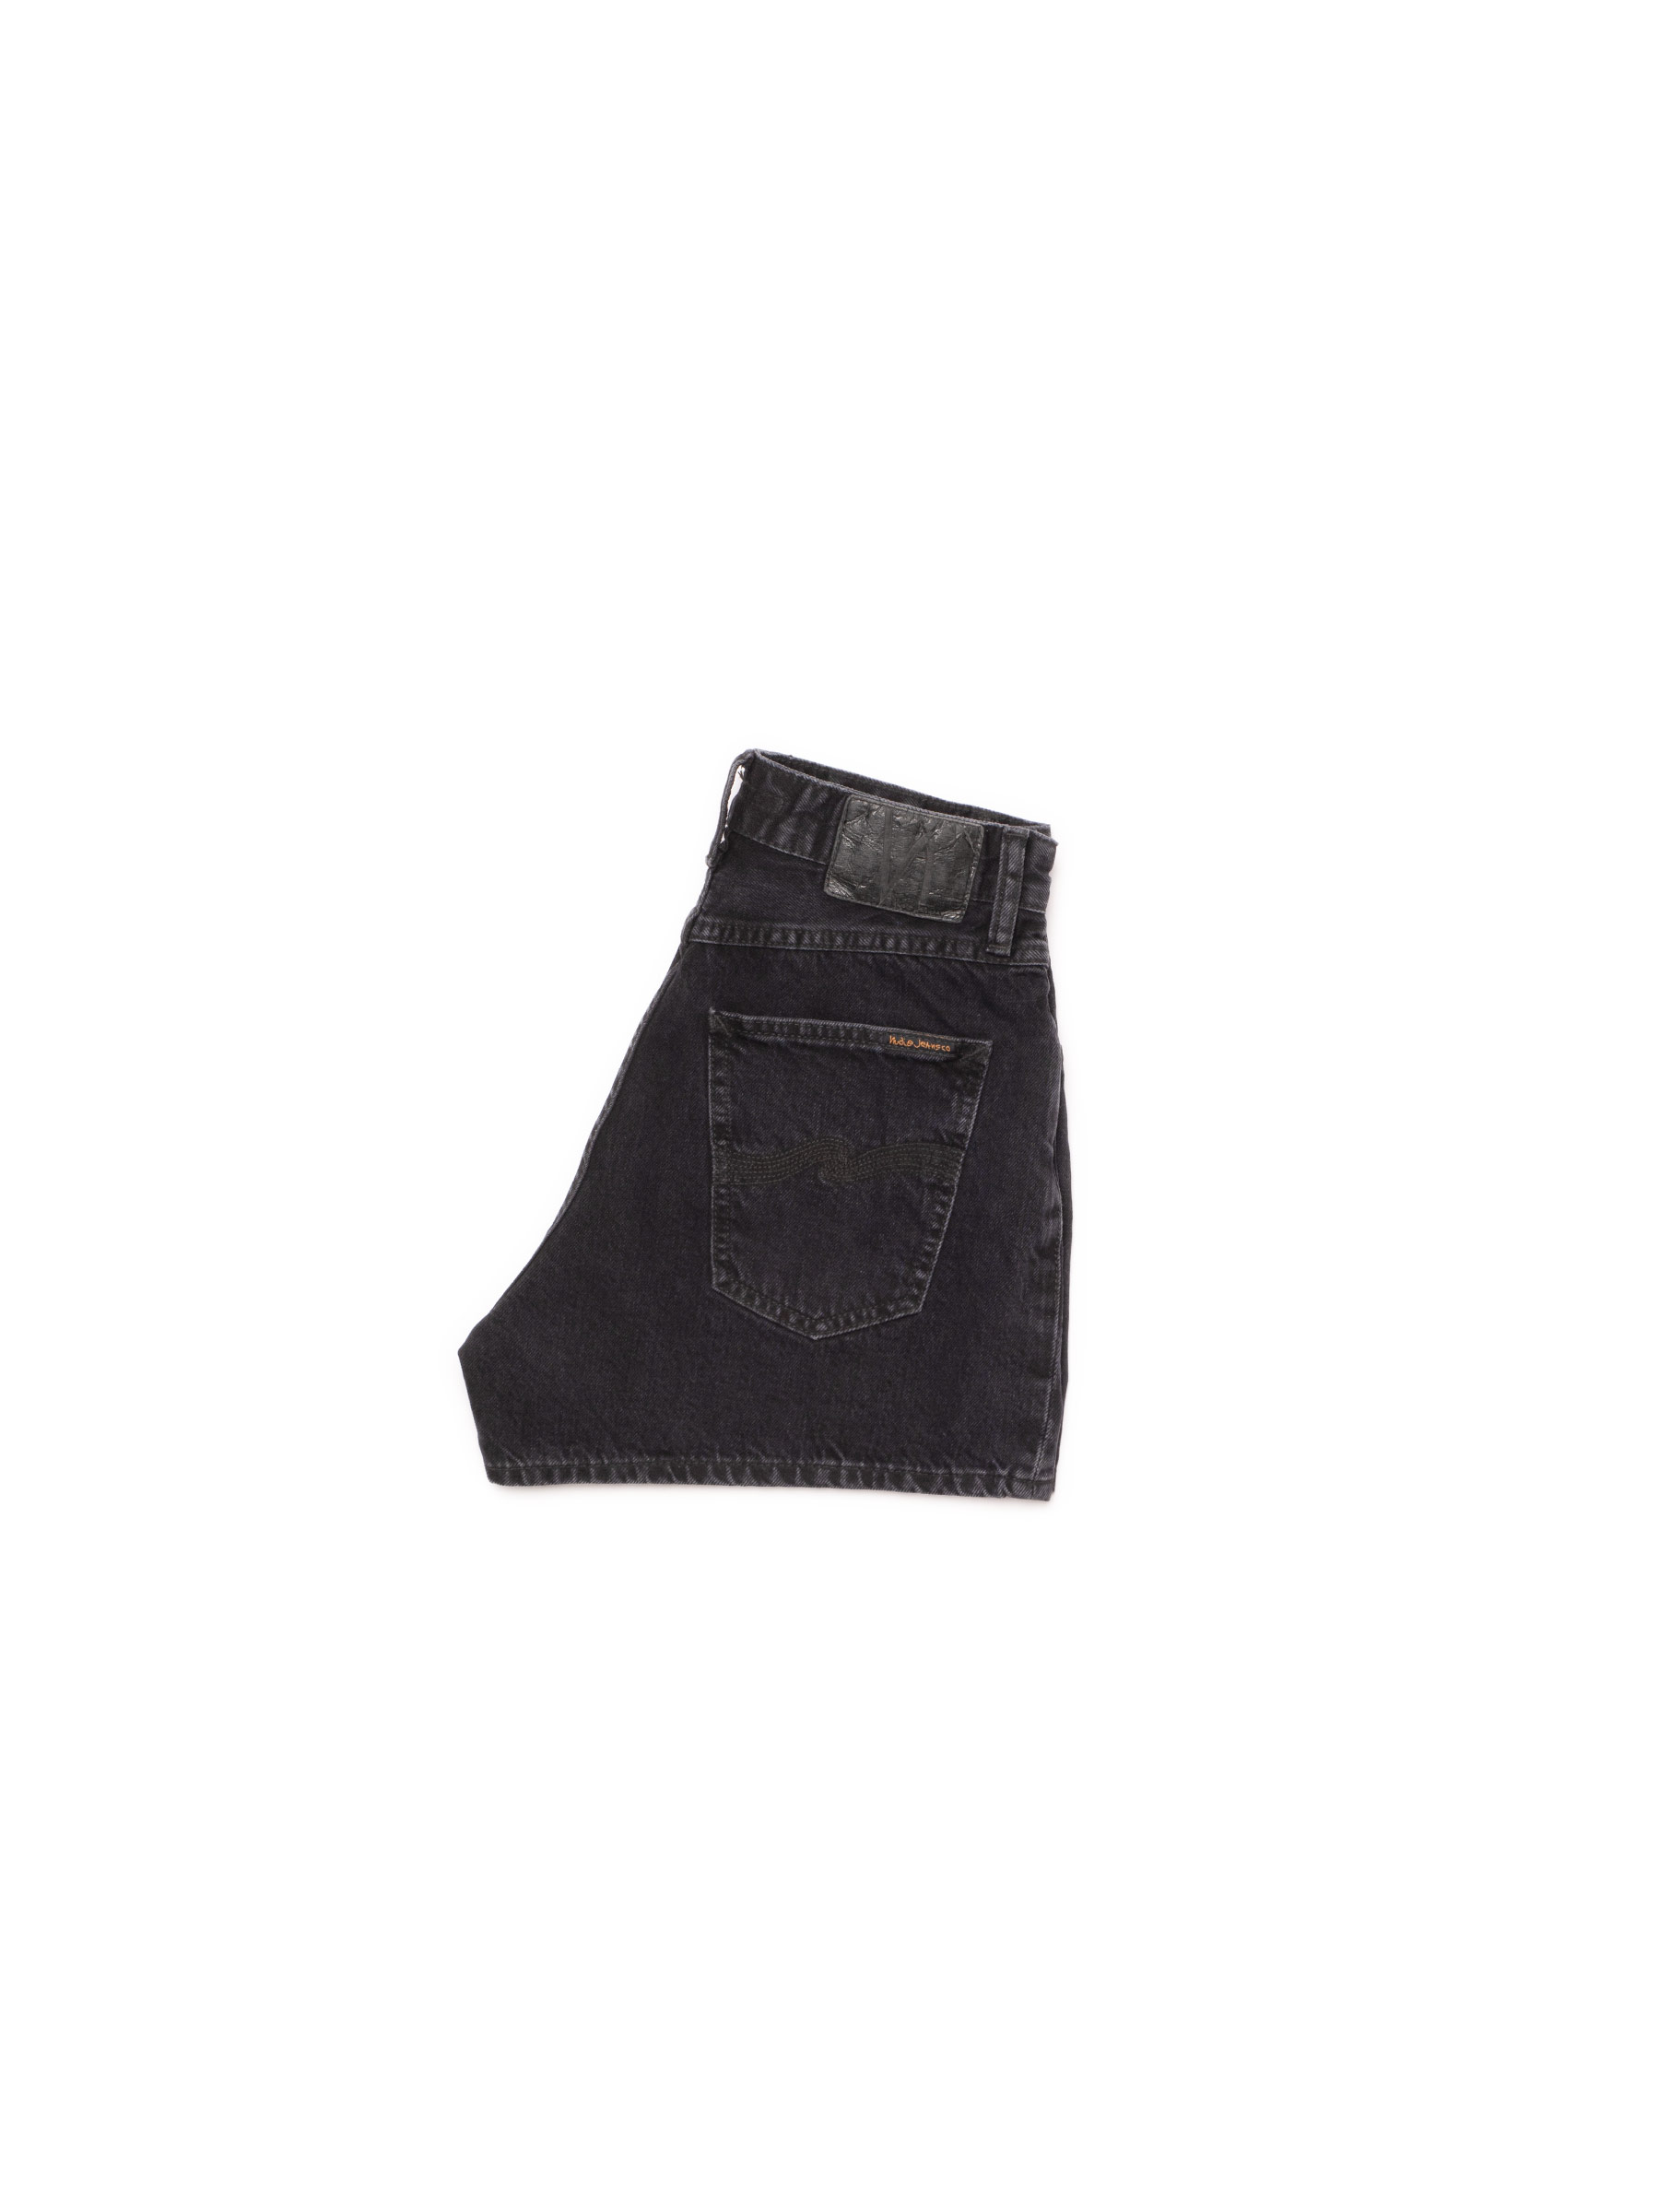 Jeans-Shorts Maeve - Smooth Black